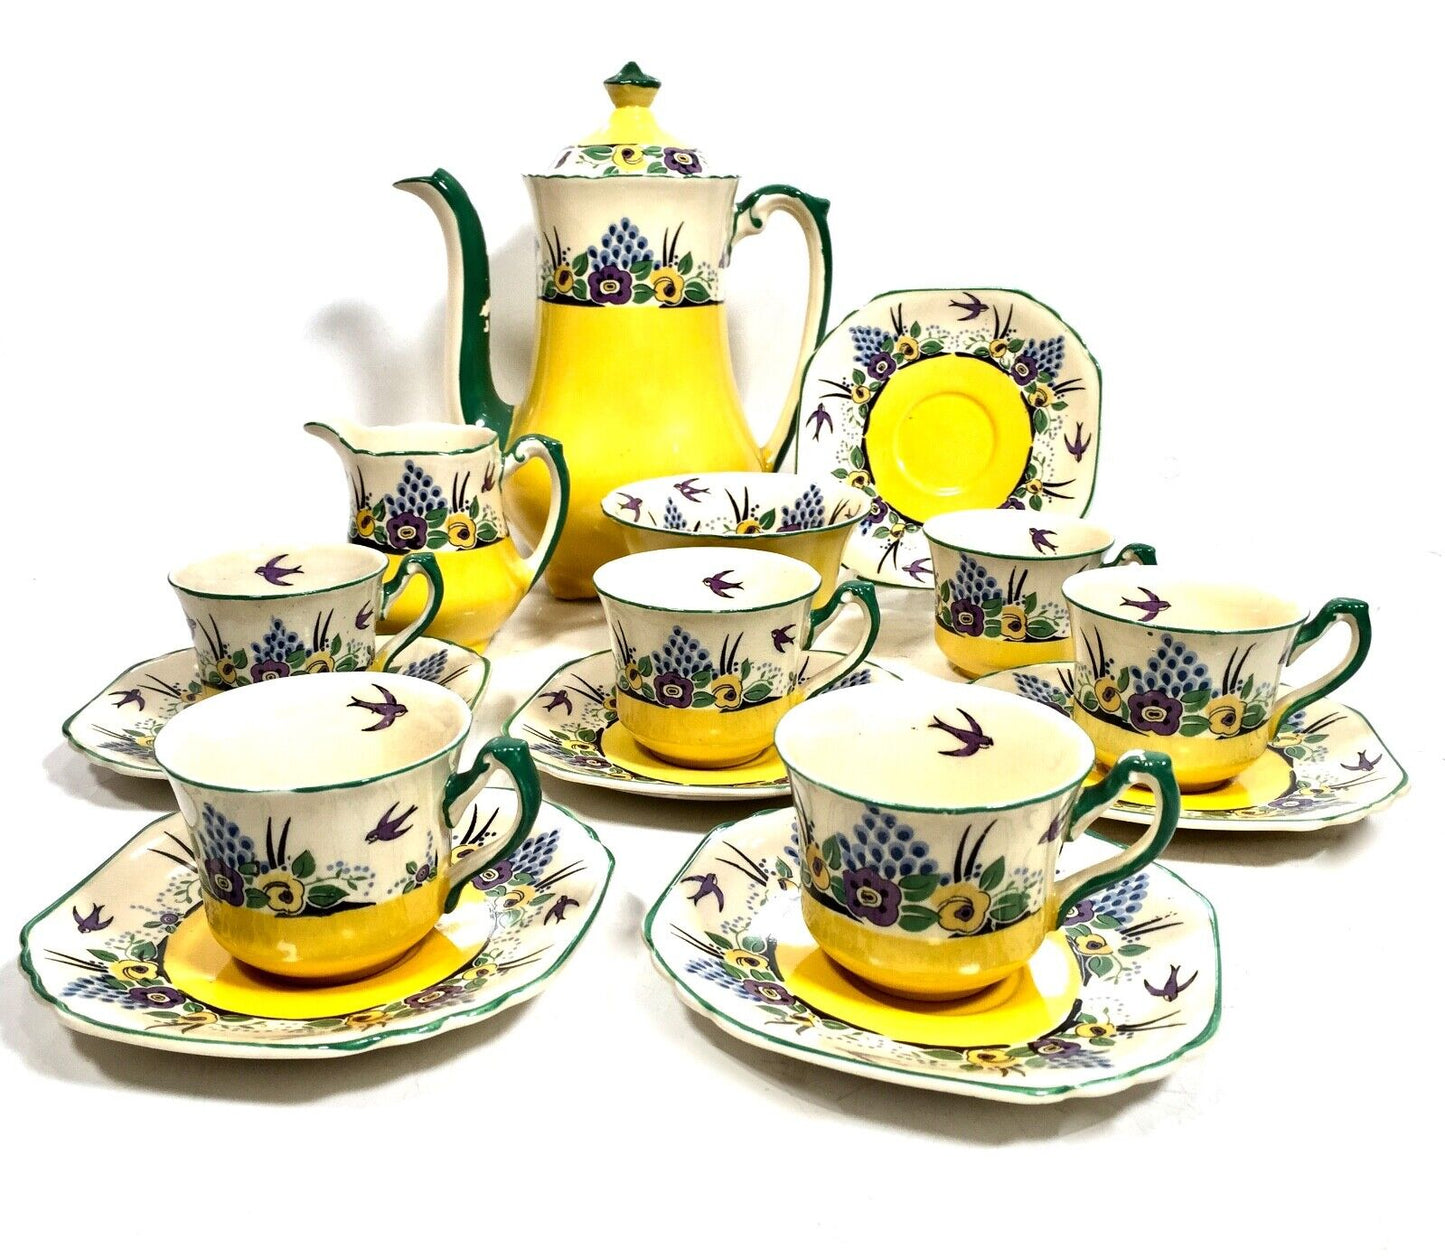 Antique Edwardian Early Wedgwood Coffee Tea Set for 6 People / Swallow Pattern